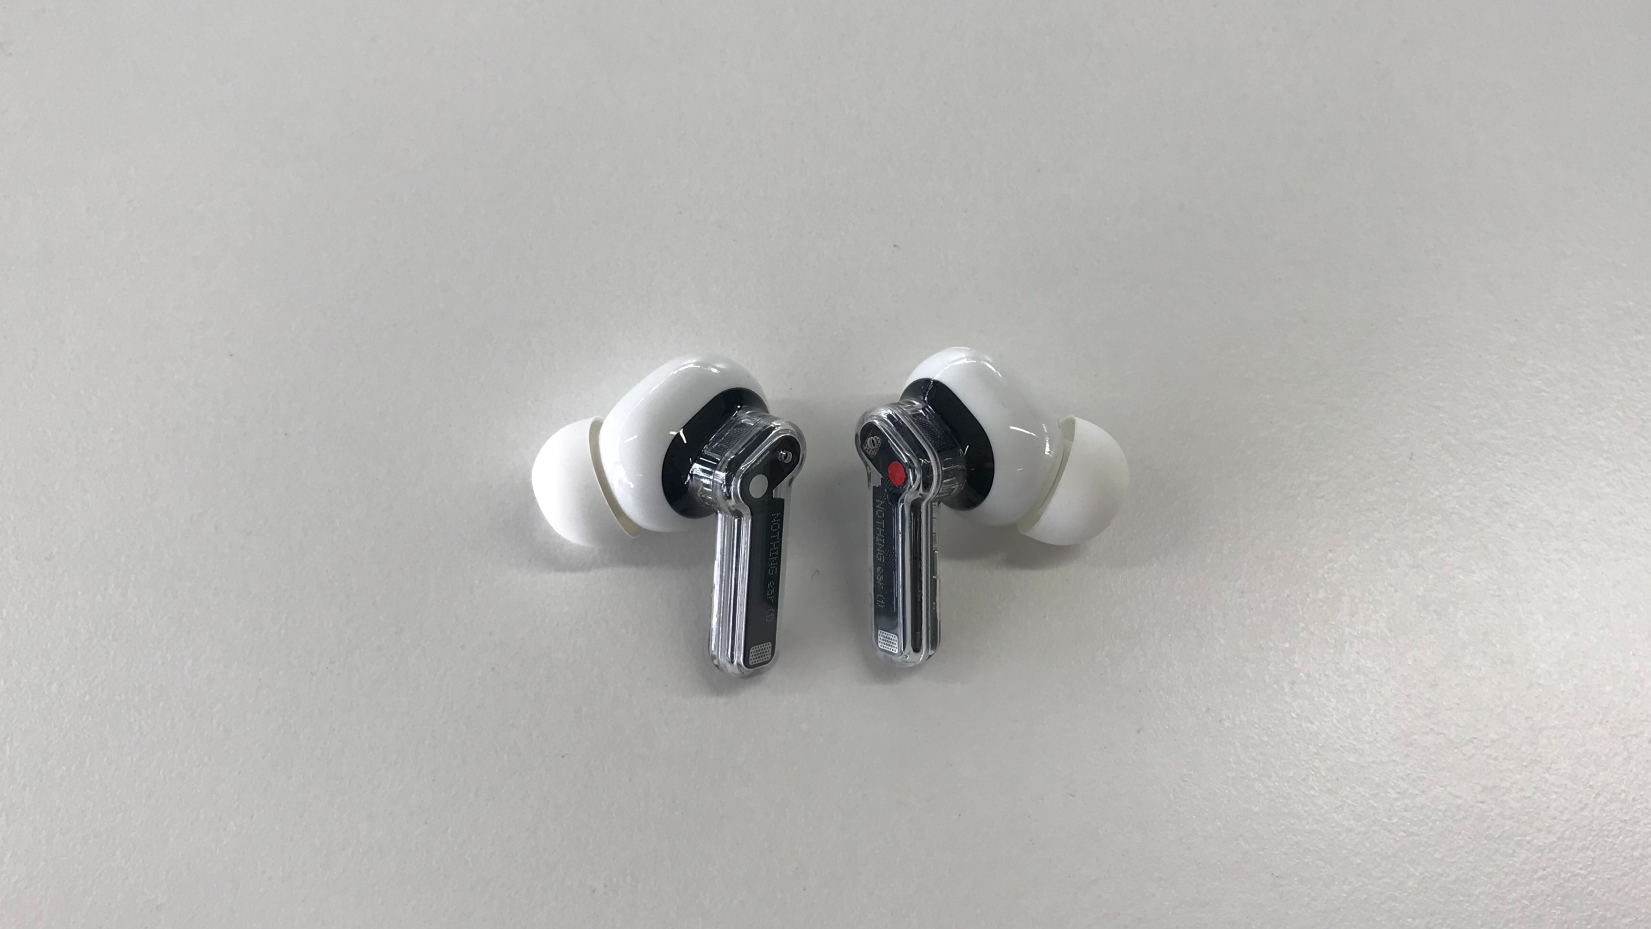 Nothing Ear 1 earbuds on a white table